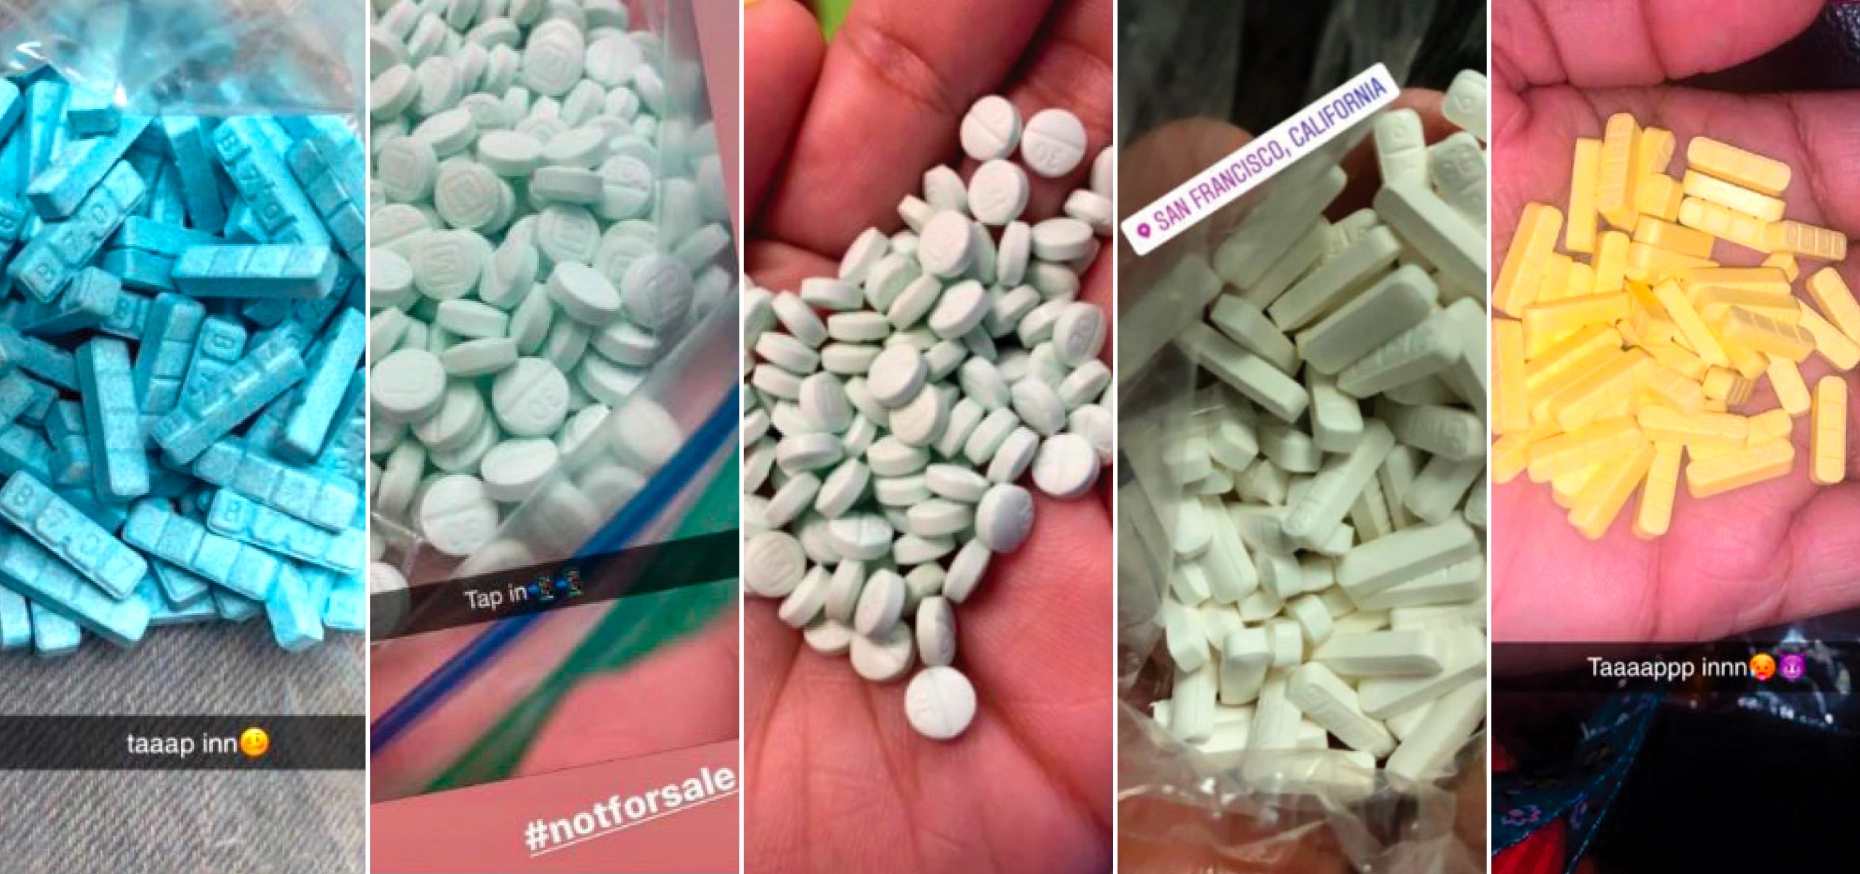 Feds bust dark web drug ring in Detroit: They were selling fake Xanax